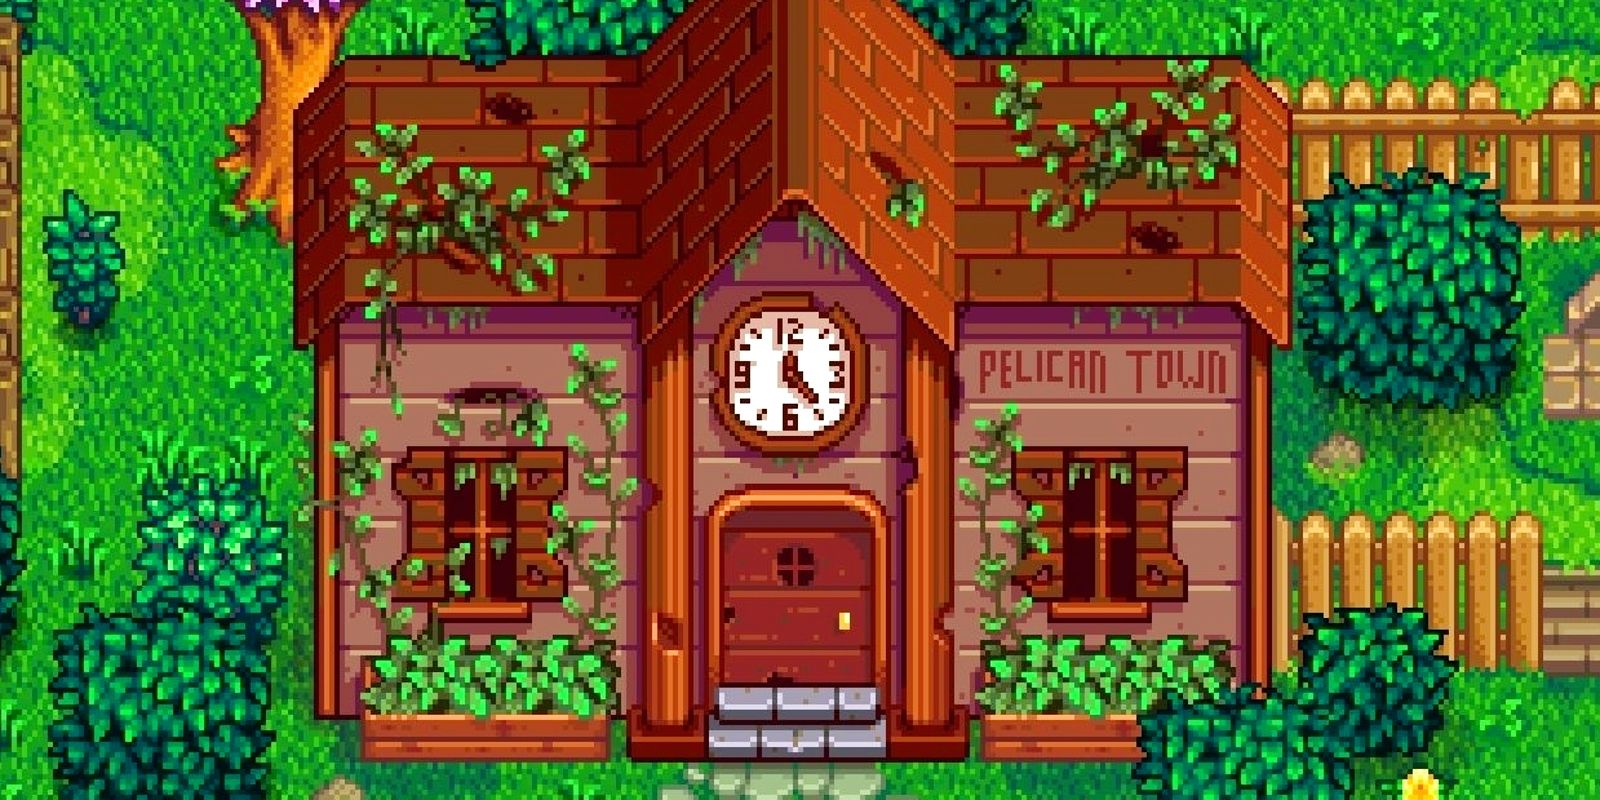 The Community Center from Stardew Valley, an overgrown building with a clock above the front door.